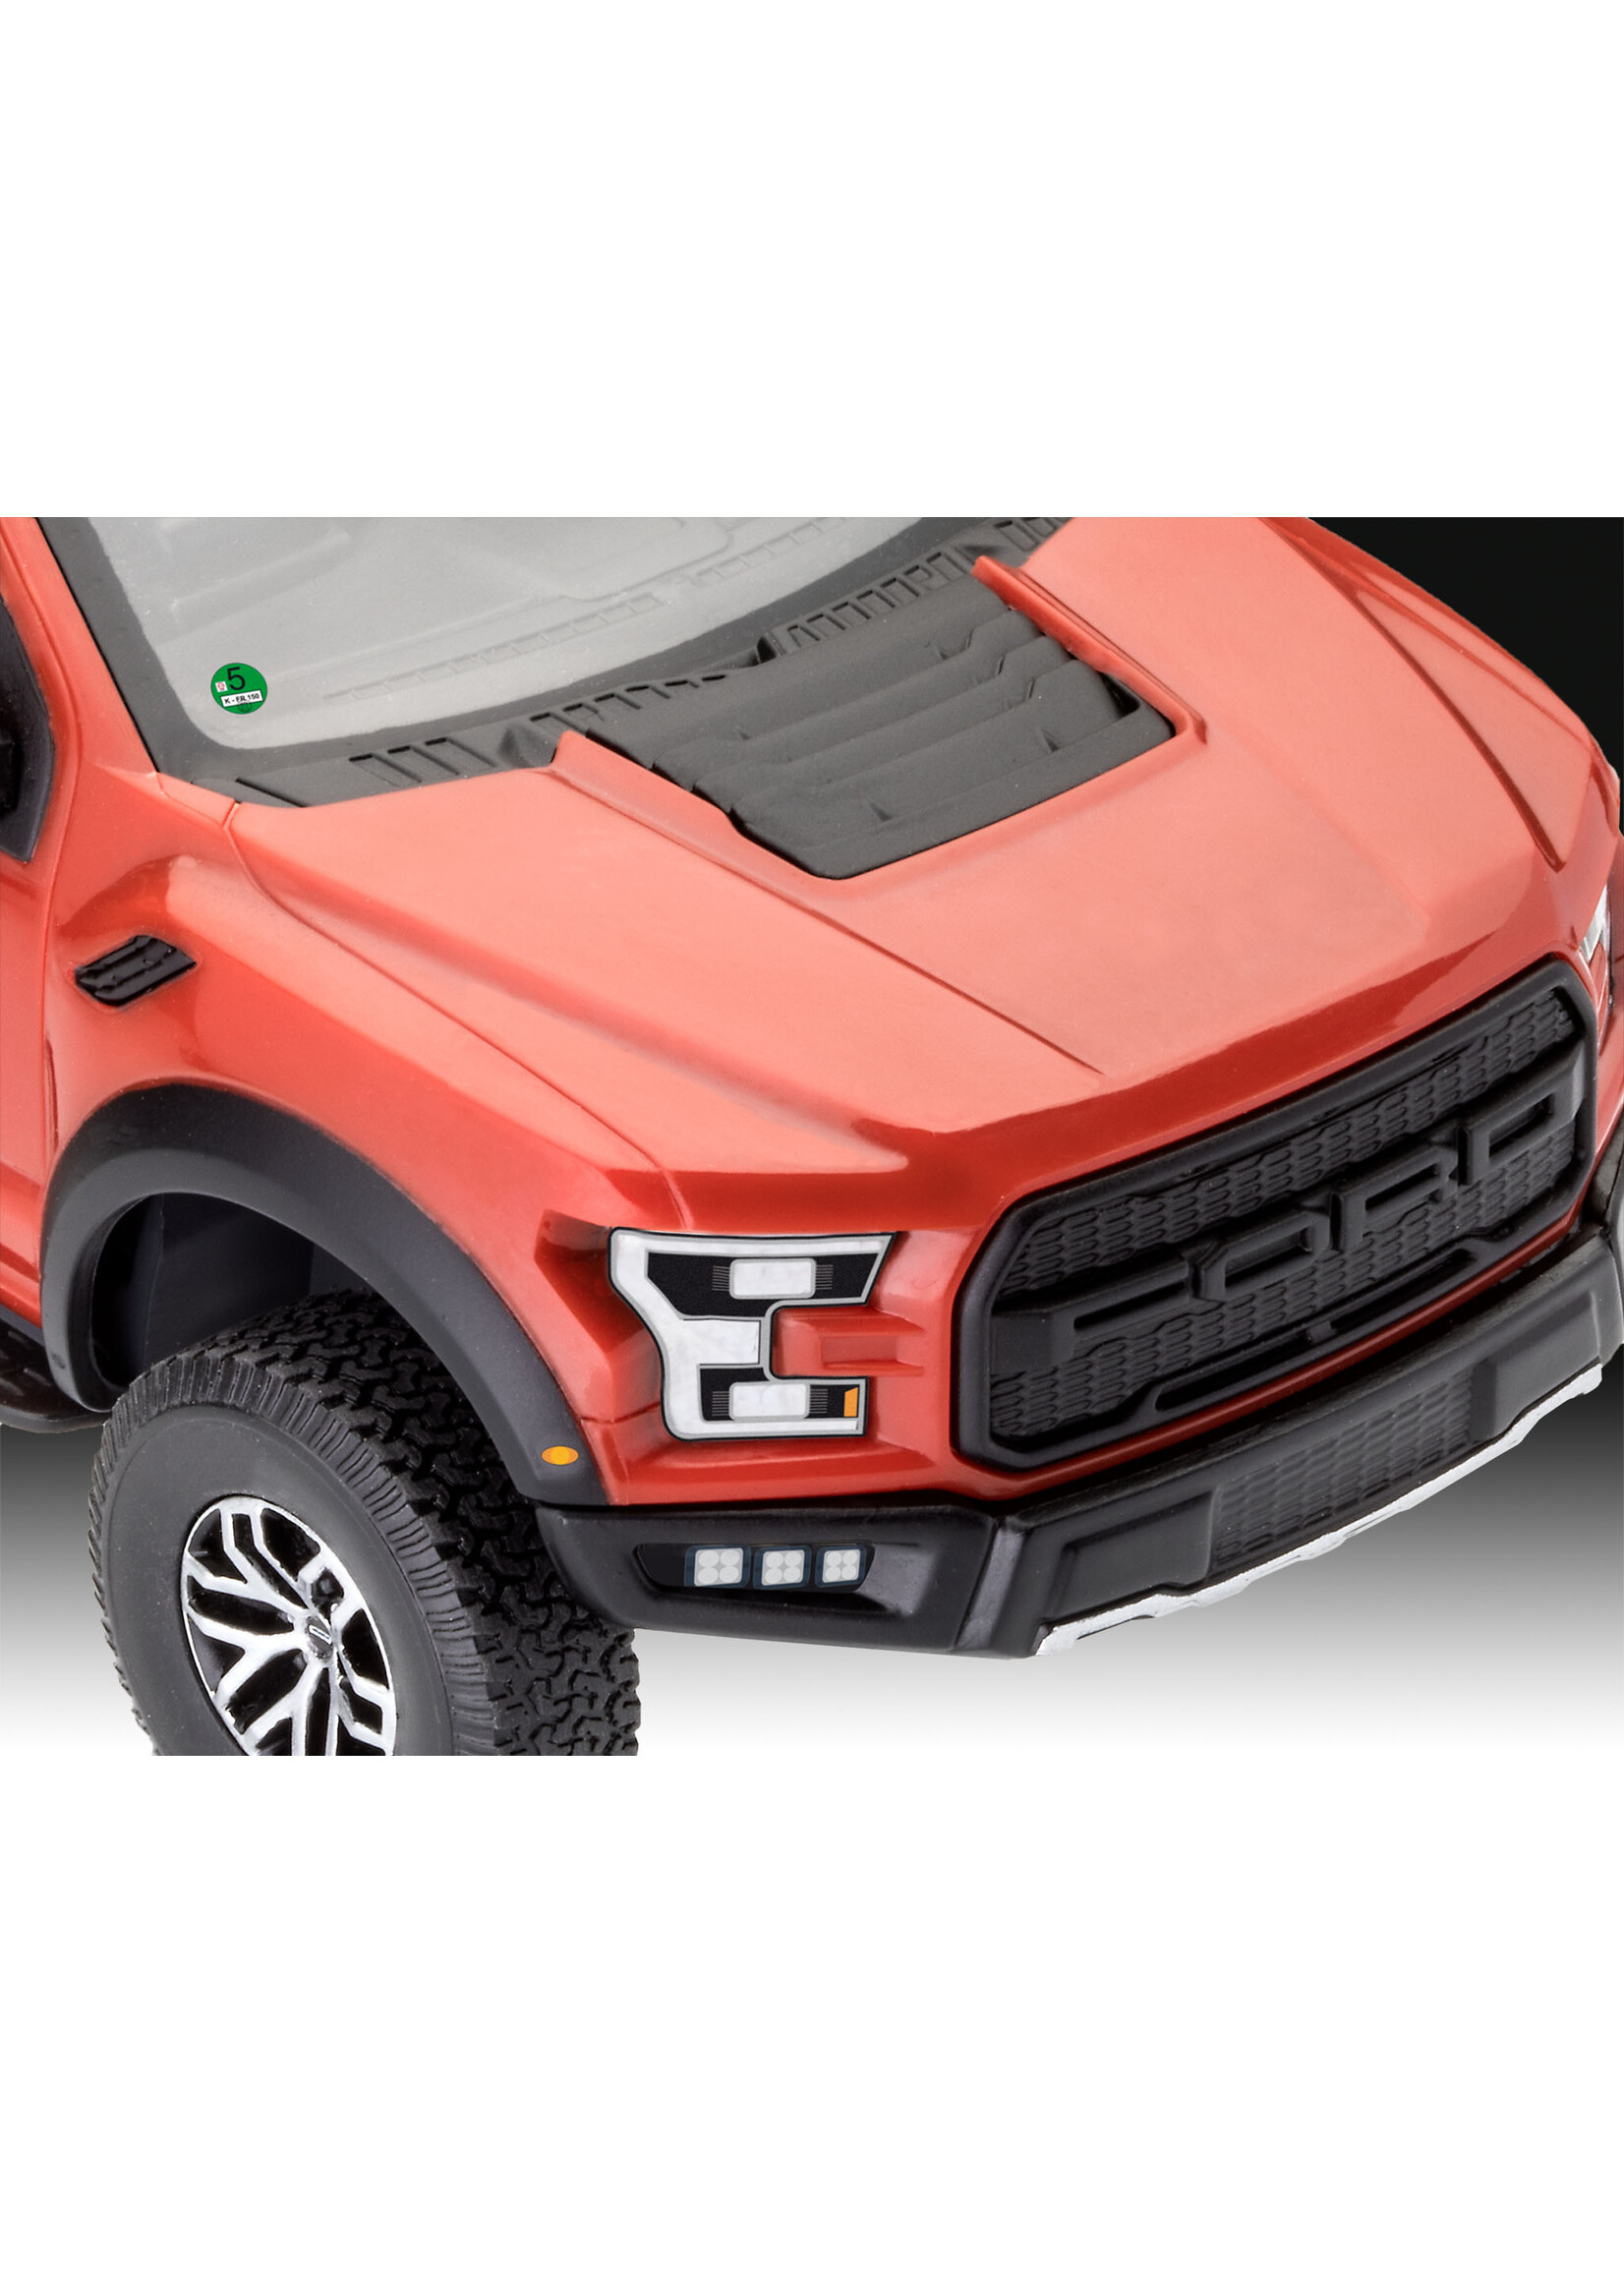 Revell of Germany 07048 - 1/25 Ford F-150 Raptor